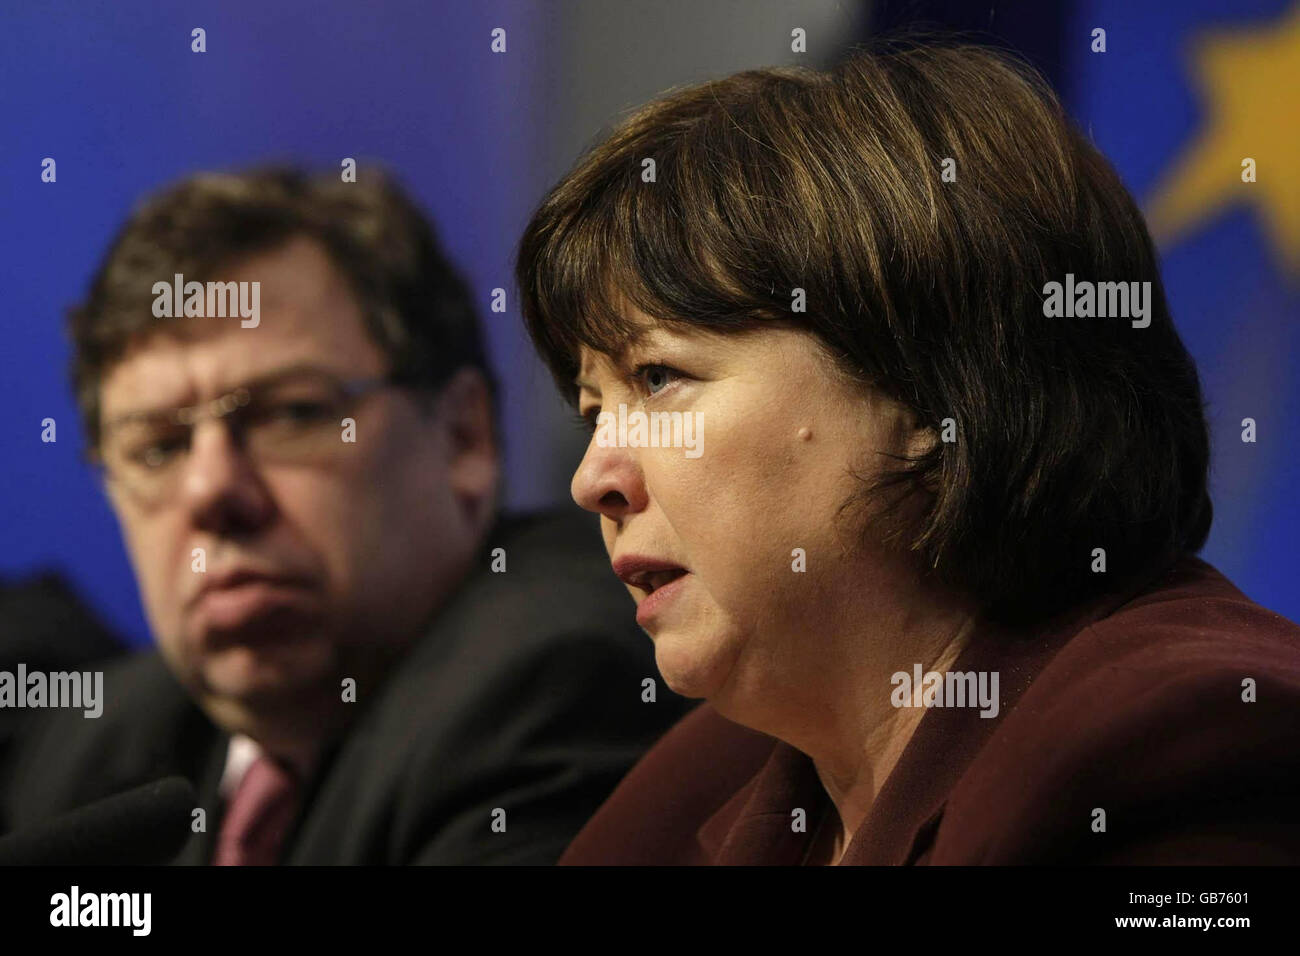 Taoiseach Brian Cowen looks on as Health Minister Mary Harney speaks at a press conference in Dublin, where the Irish government announced a climbdown over controversial plans to abolish automatic free health care for the over 70s. Stock Photo